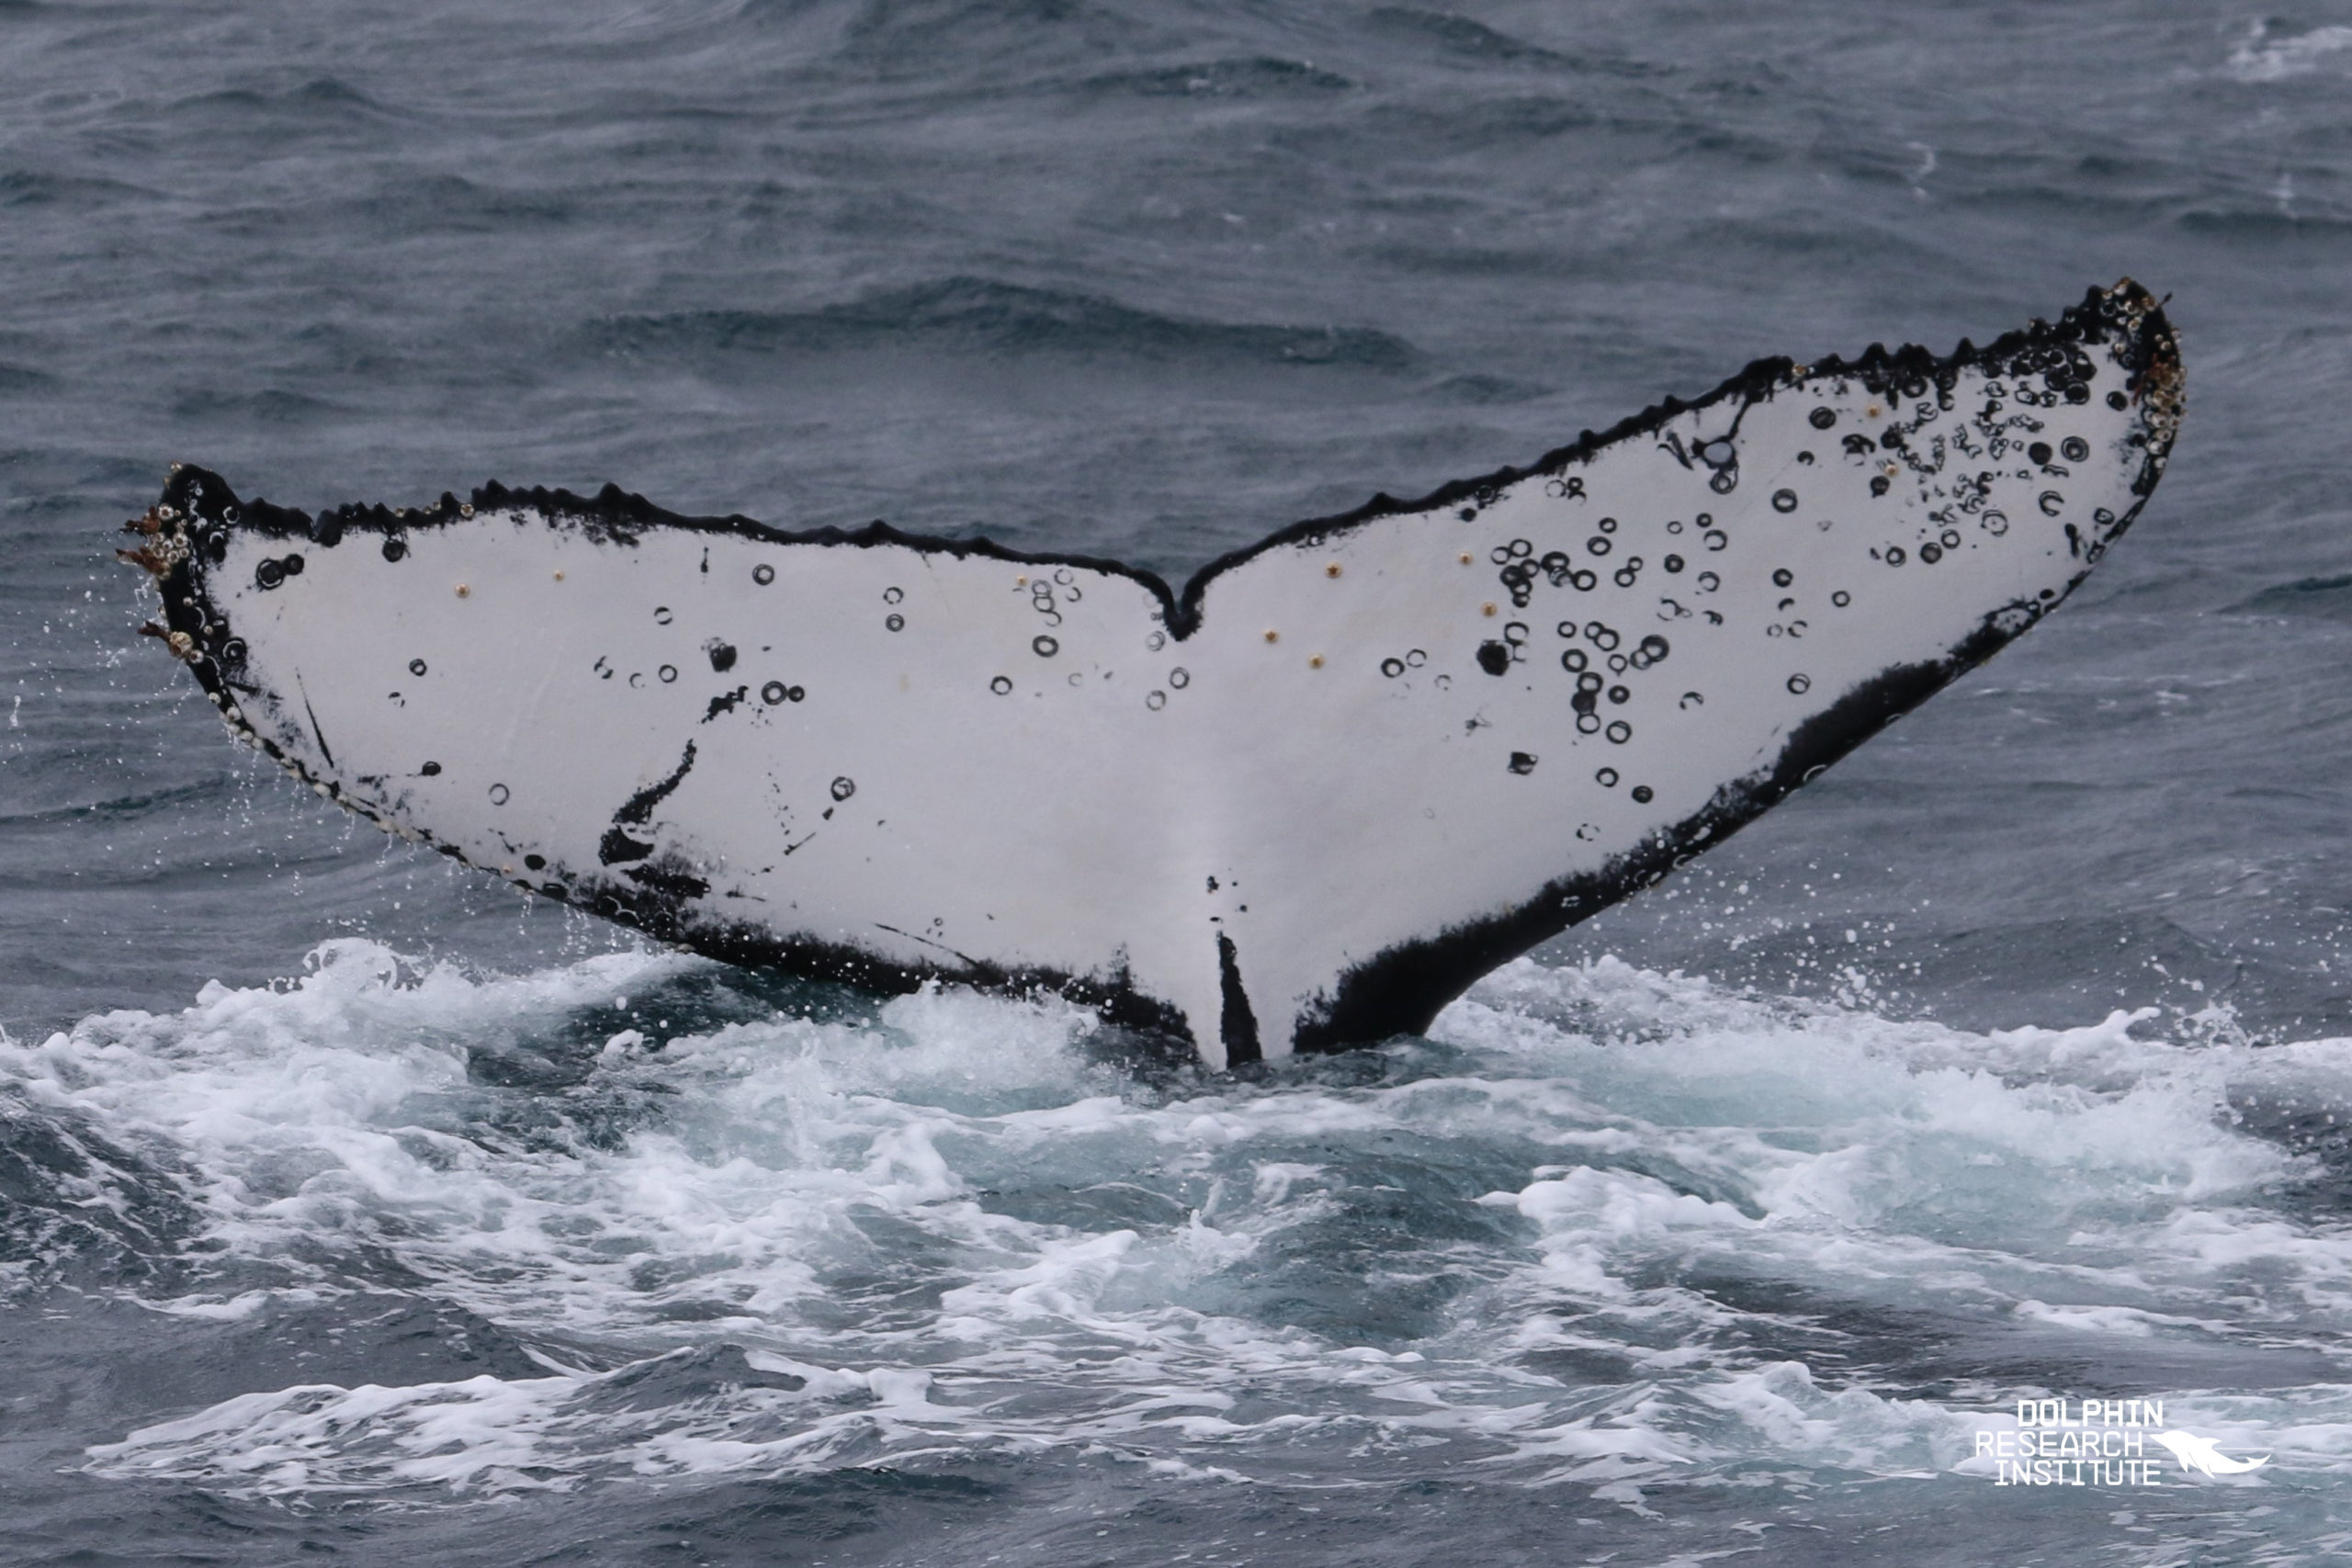 50th Victorian Humpback Whale Catalogued – a Huge Milestone For Conservation (DRI Media Release)